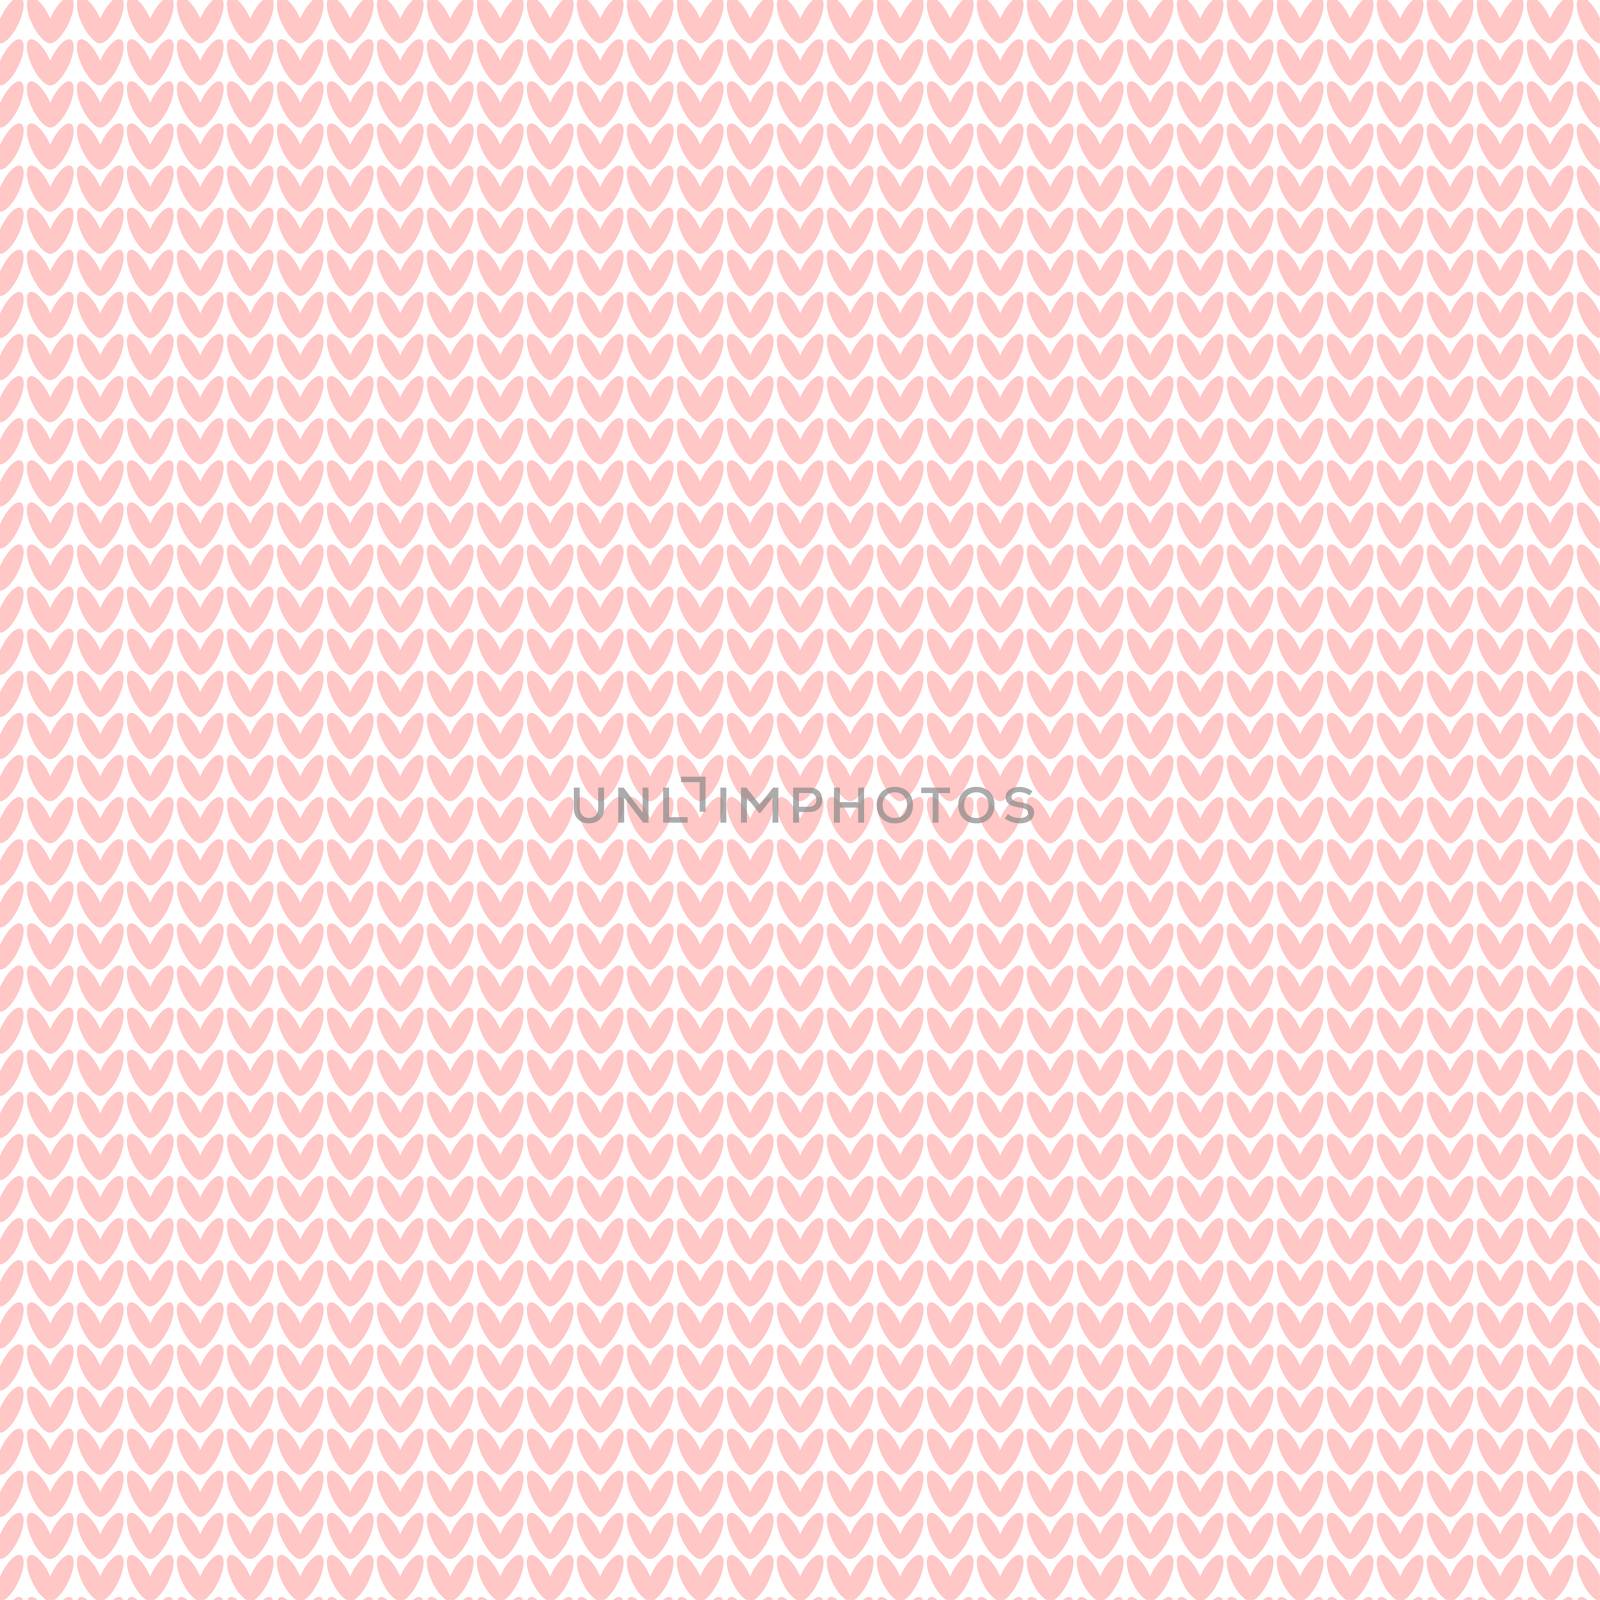 Knitted realistic seamless pattern of pink color. Knit texture.